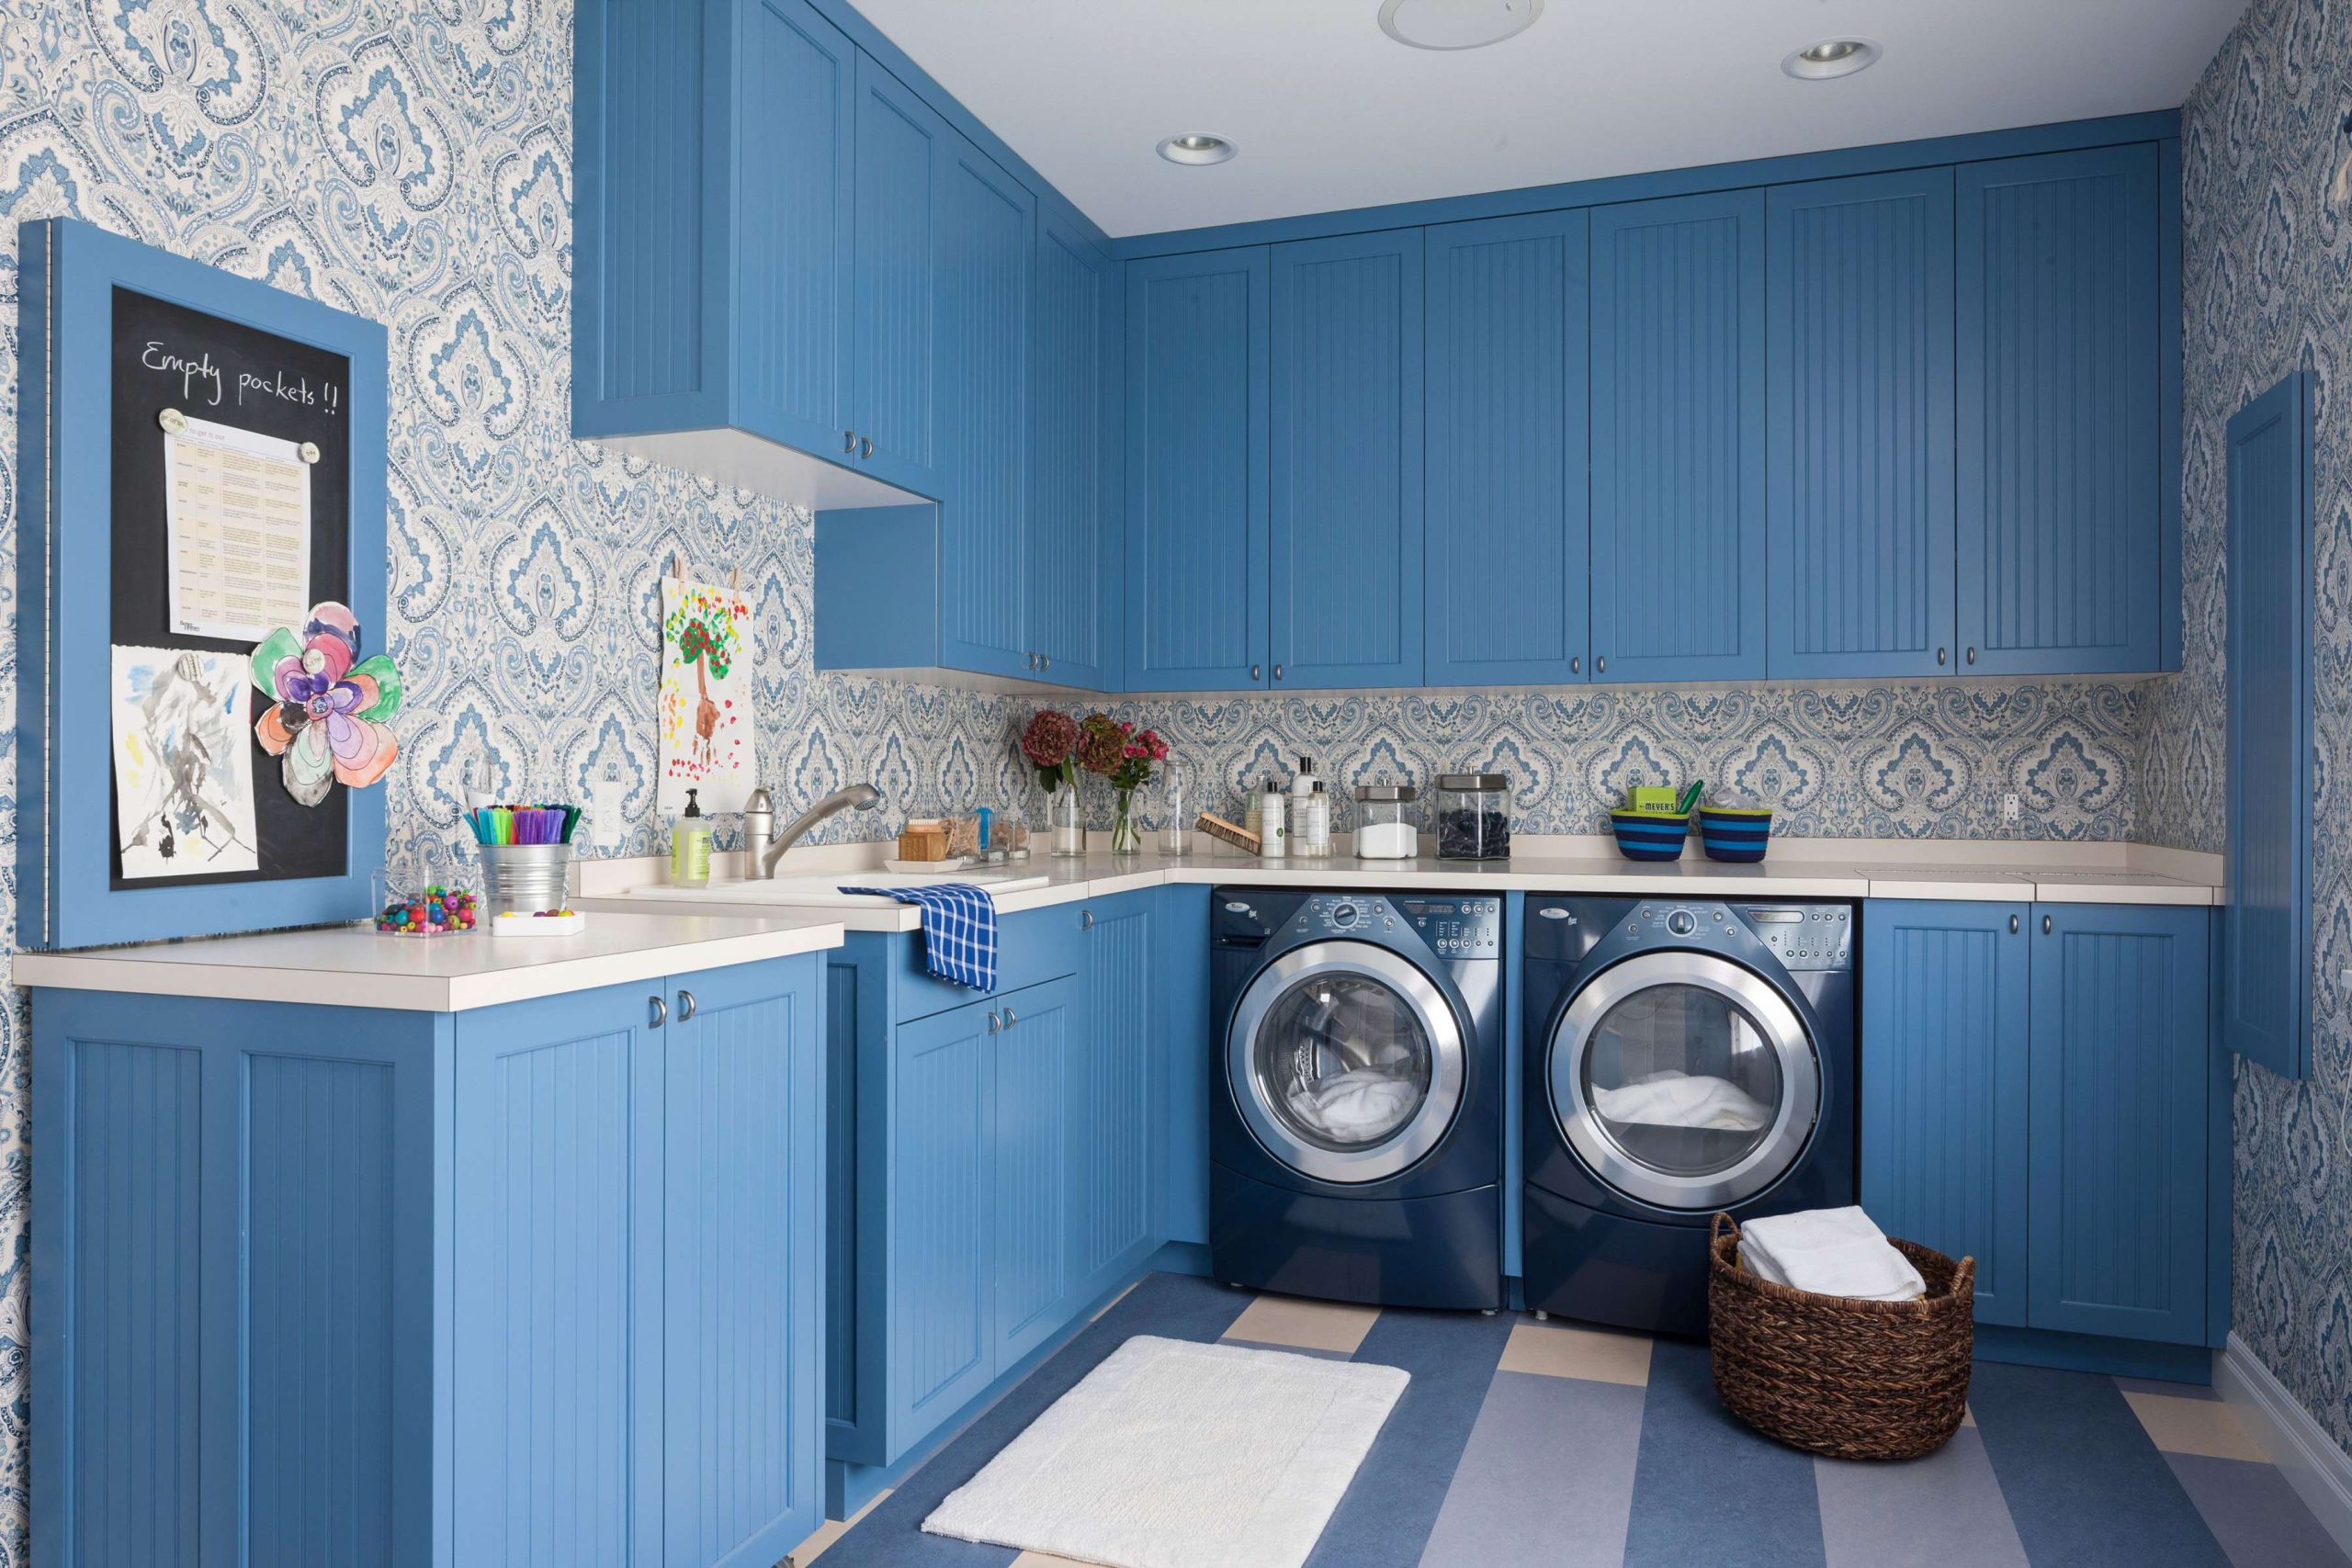 Basement Laundry Room Ideas for a Bright, Functional Space